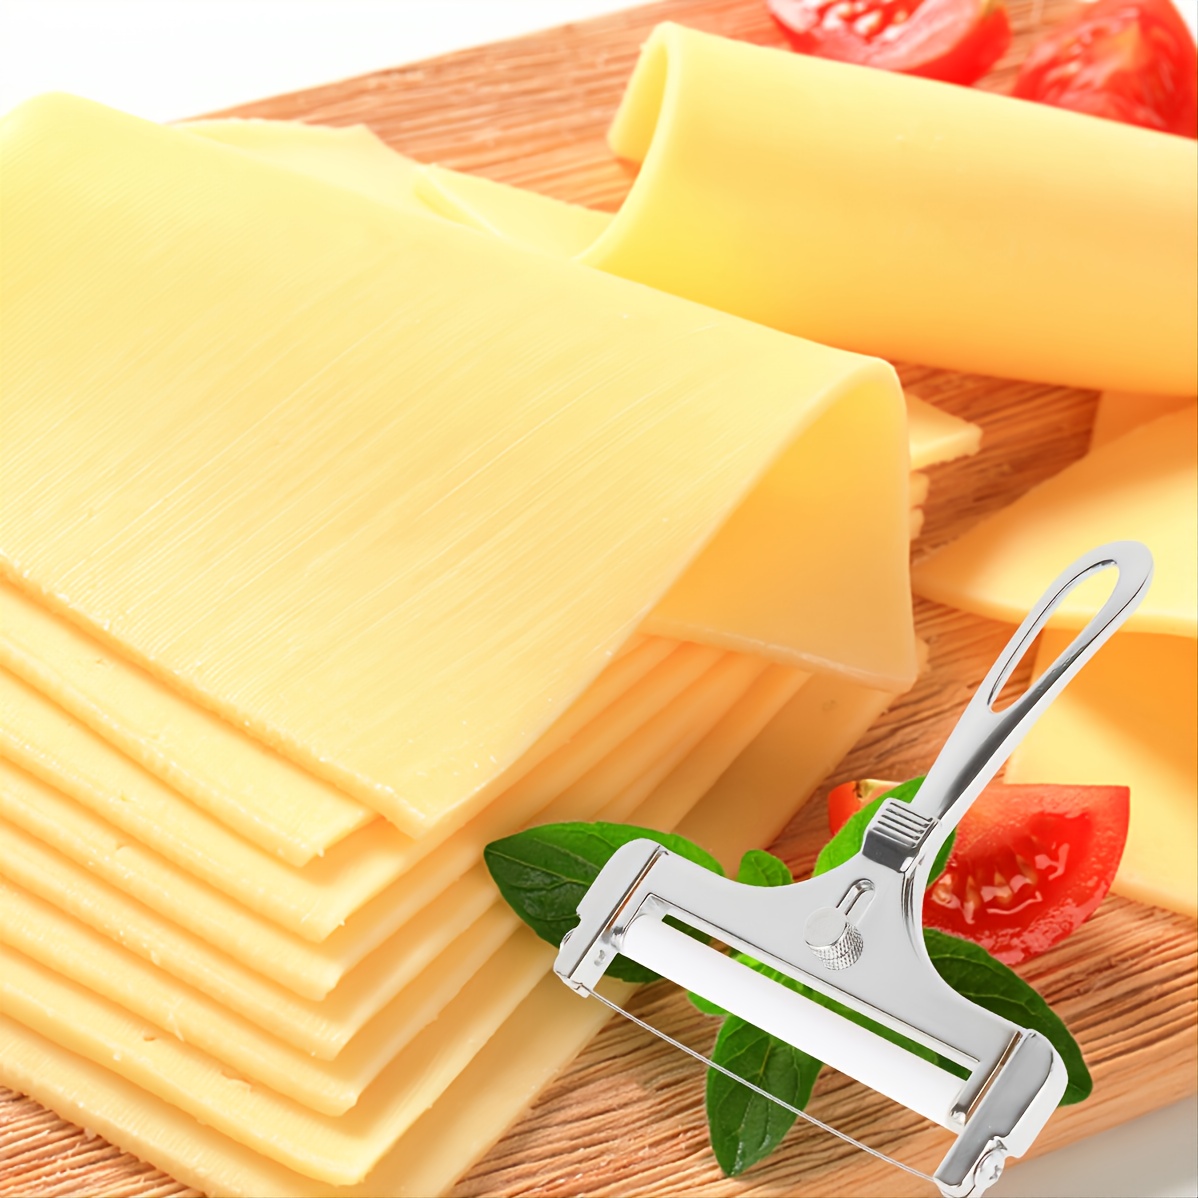 Stainless Steel Cheese Slicer, Handle,Adjustable Thickness Wire Cheese  Cutter Perfectly for Kitchen Cooking